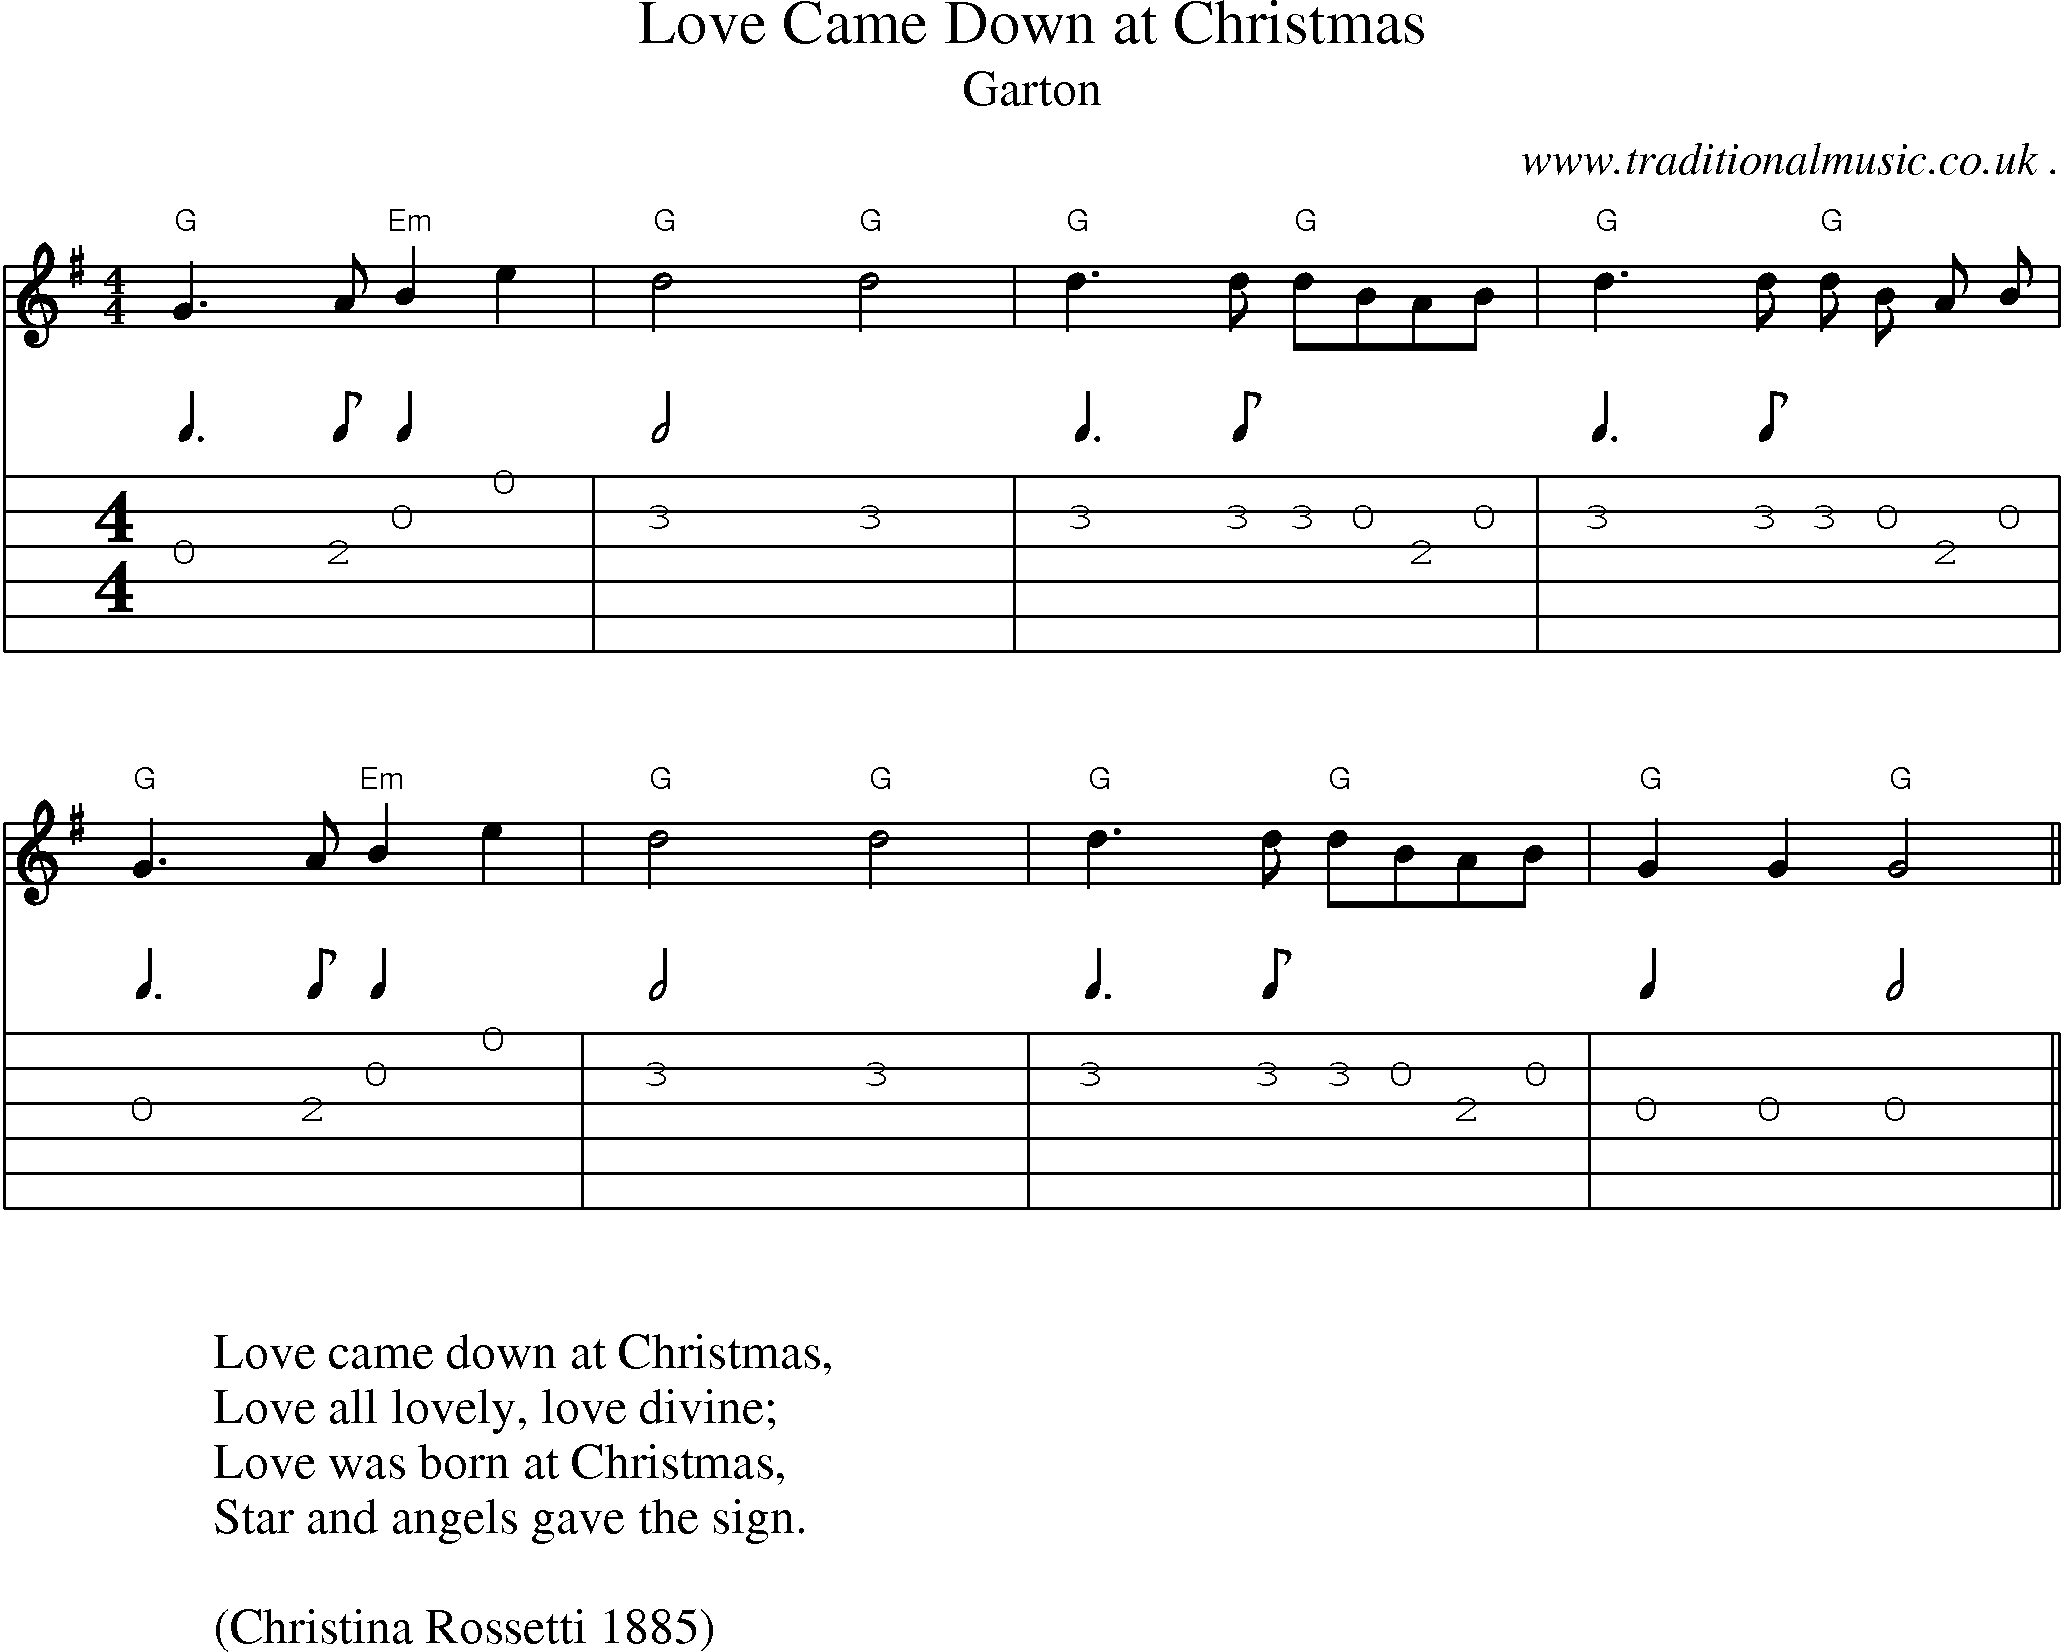 Music Score and Guitar Tabs for Love Came Down at Christmas